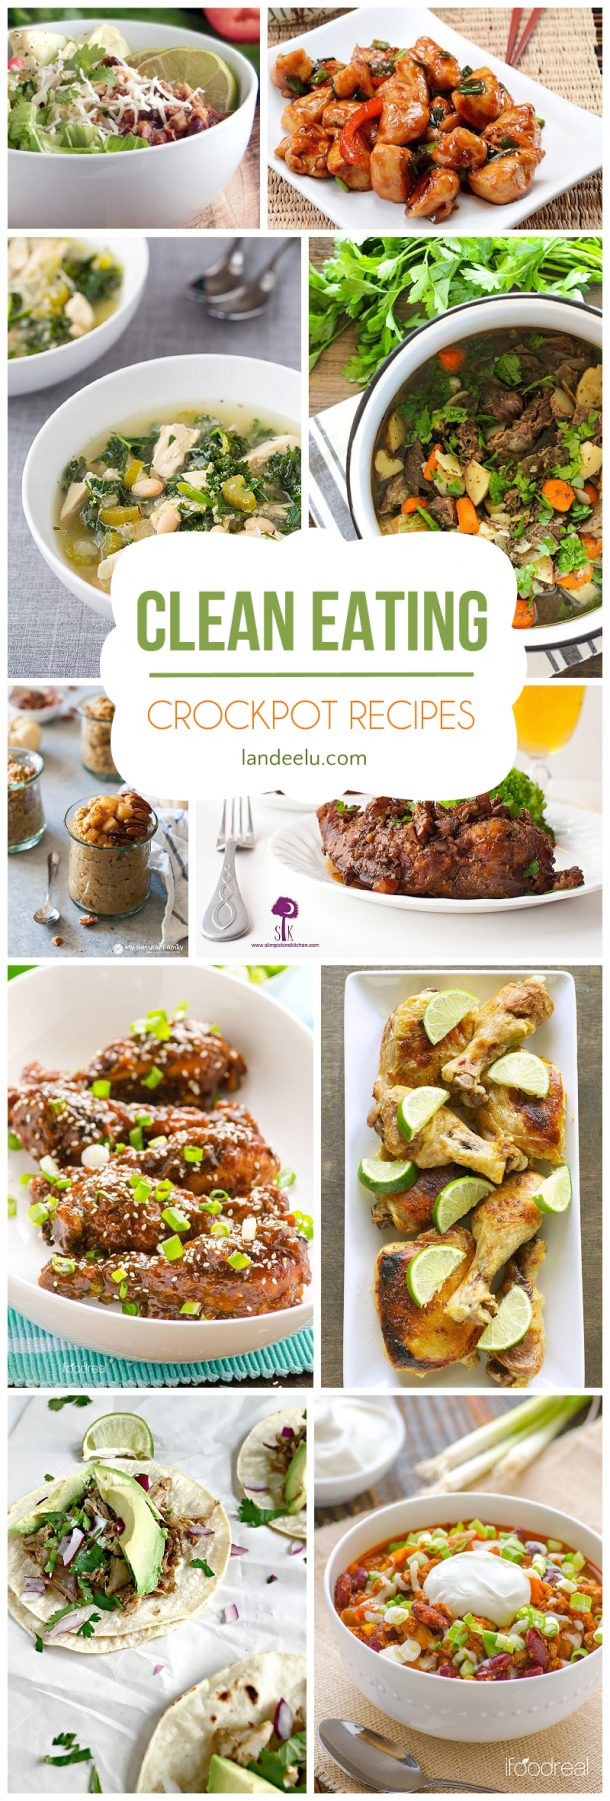 Clean Dinner Recipes
 Delicious Clean Eating Crockpot Recipes Page 2 of 2